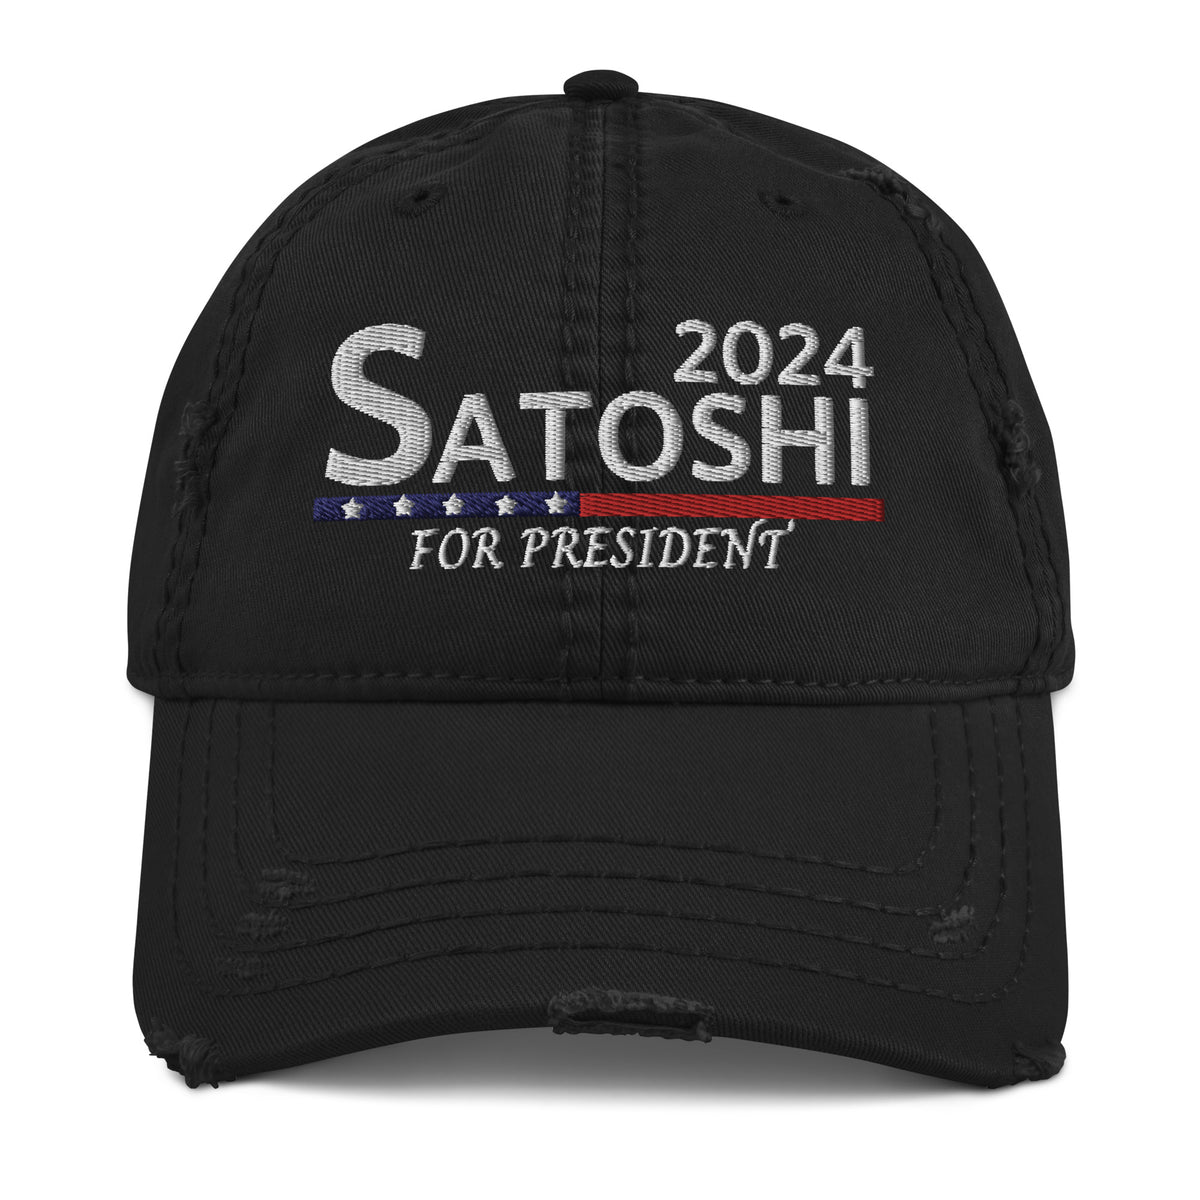 Satoshi For President 2024 (White Lettering) Bitcoin Distressed Dad Hat - fomo21